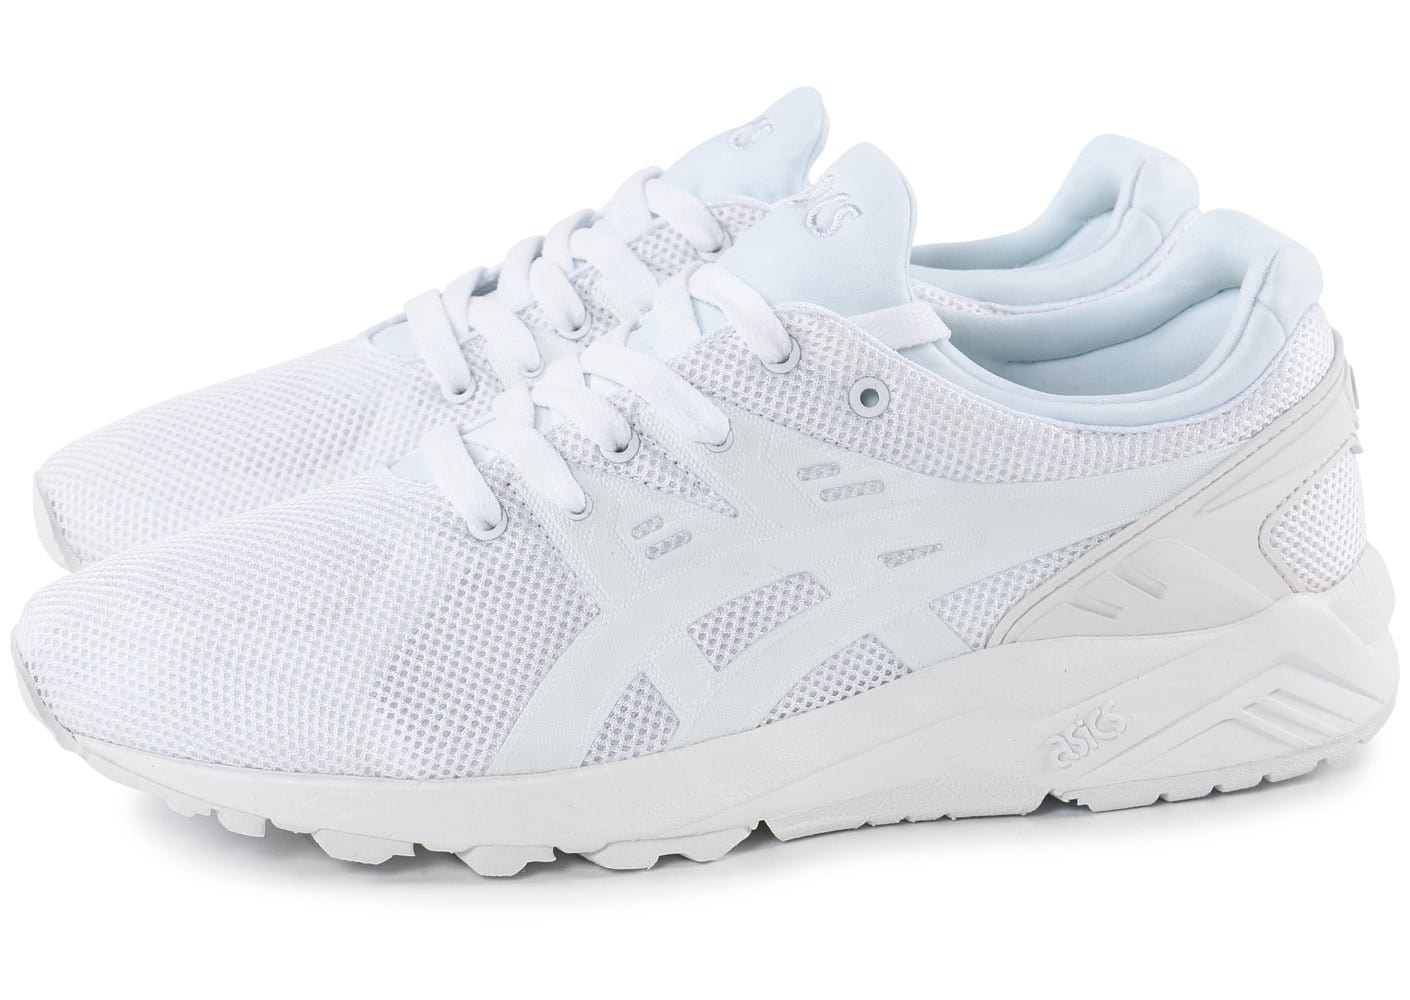 chaussures asics blanches, ... Chaussures Asics Gel Kayano Trainer Evo blanche vue avant ...